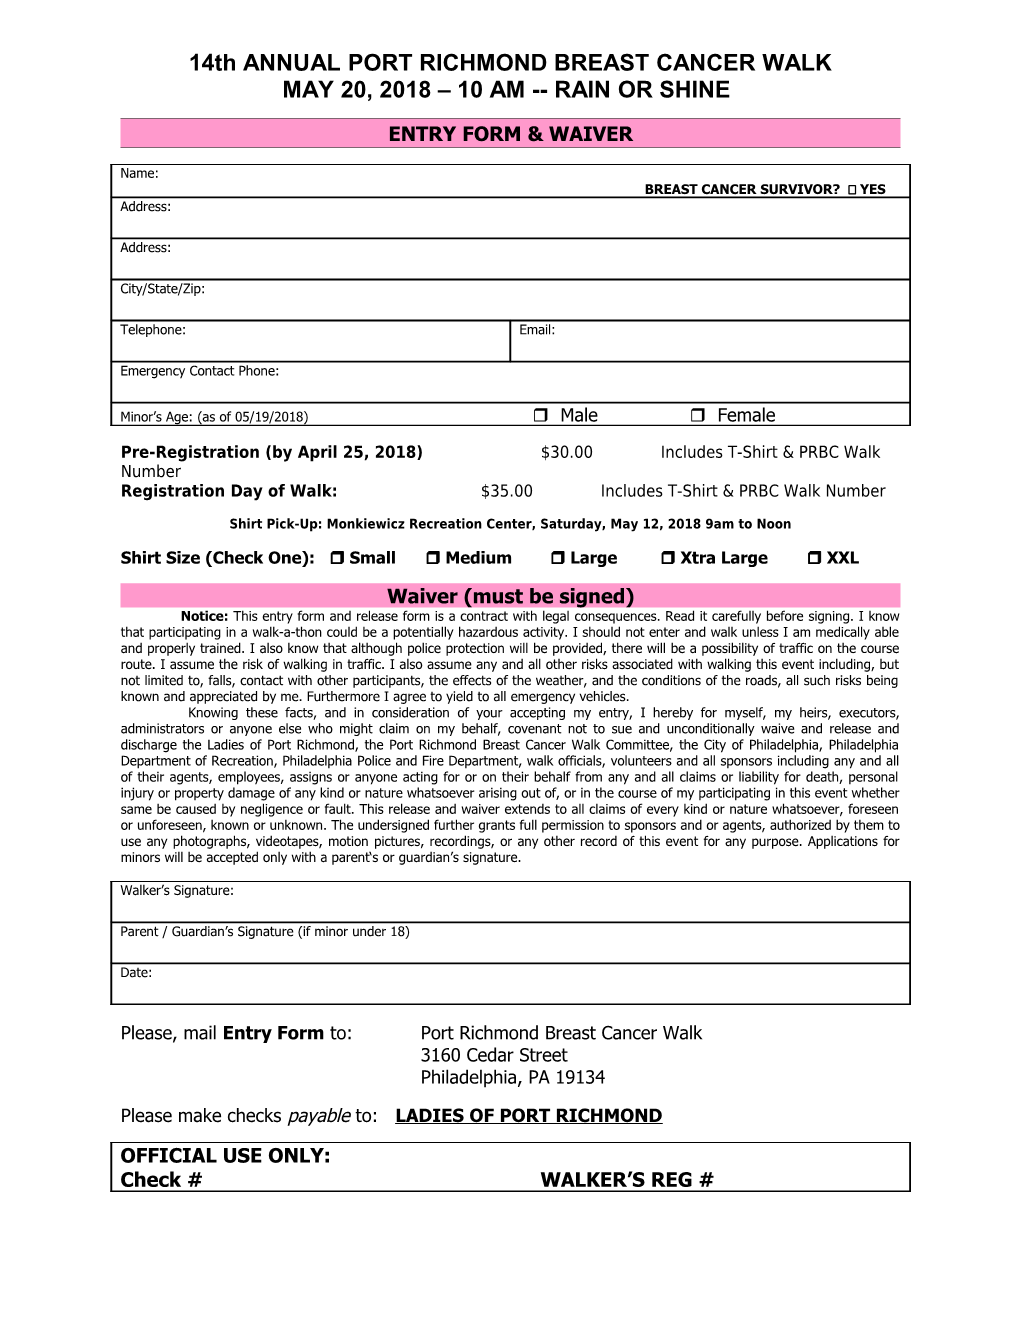 Entry Form & Waiver